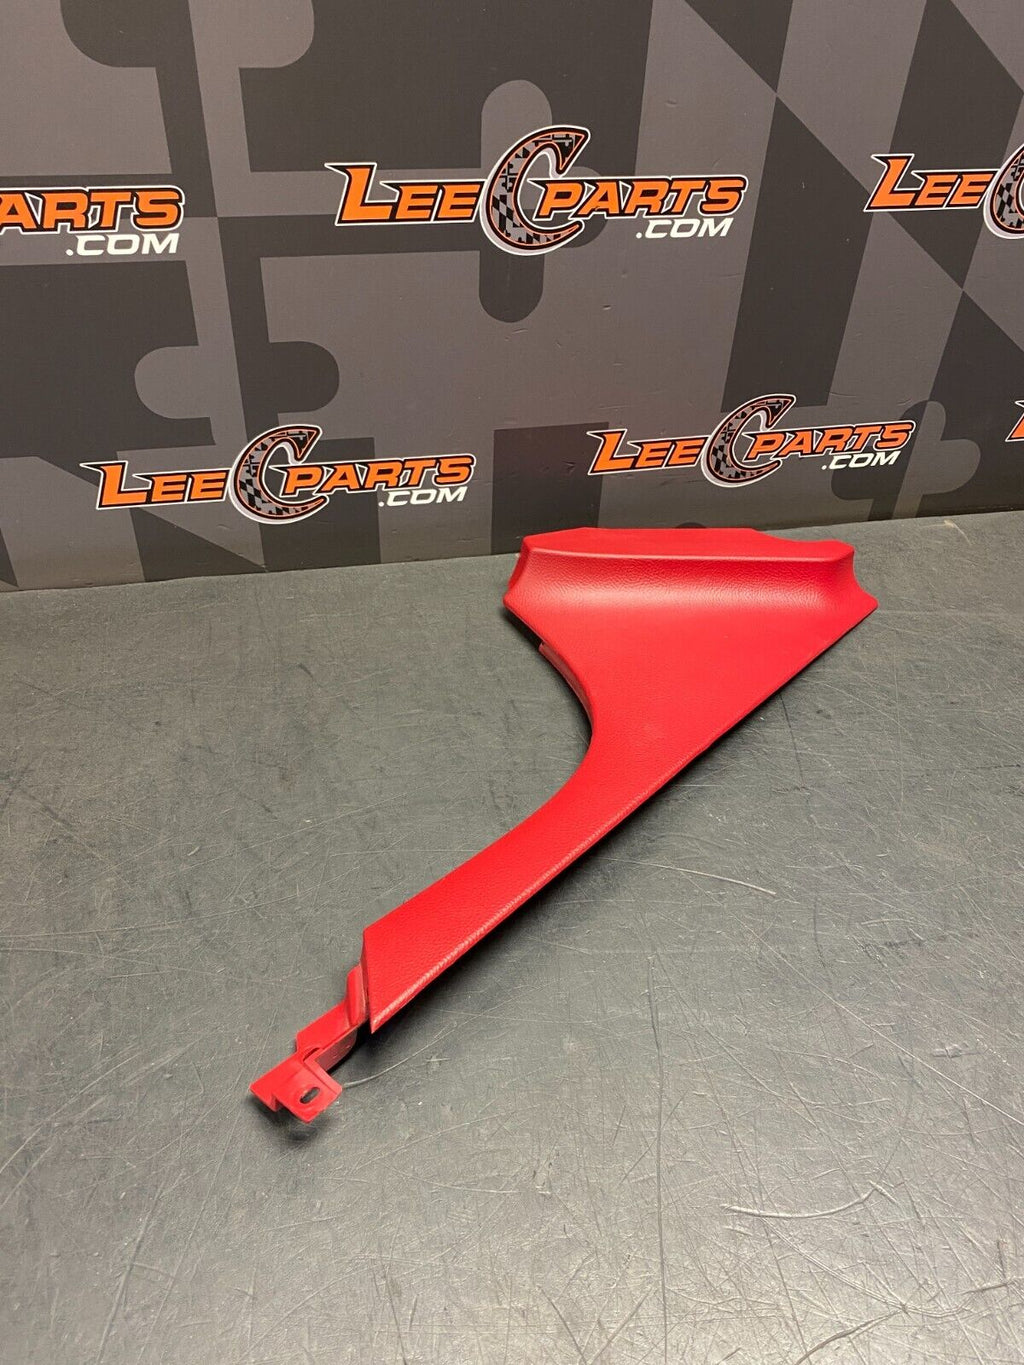 2005 CORVETTE C6 OEM COBALT RED SIDE CENTER CONSOLE PANEL PS SIDE OF CONSOL USED